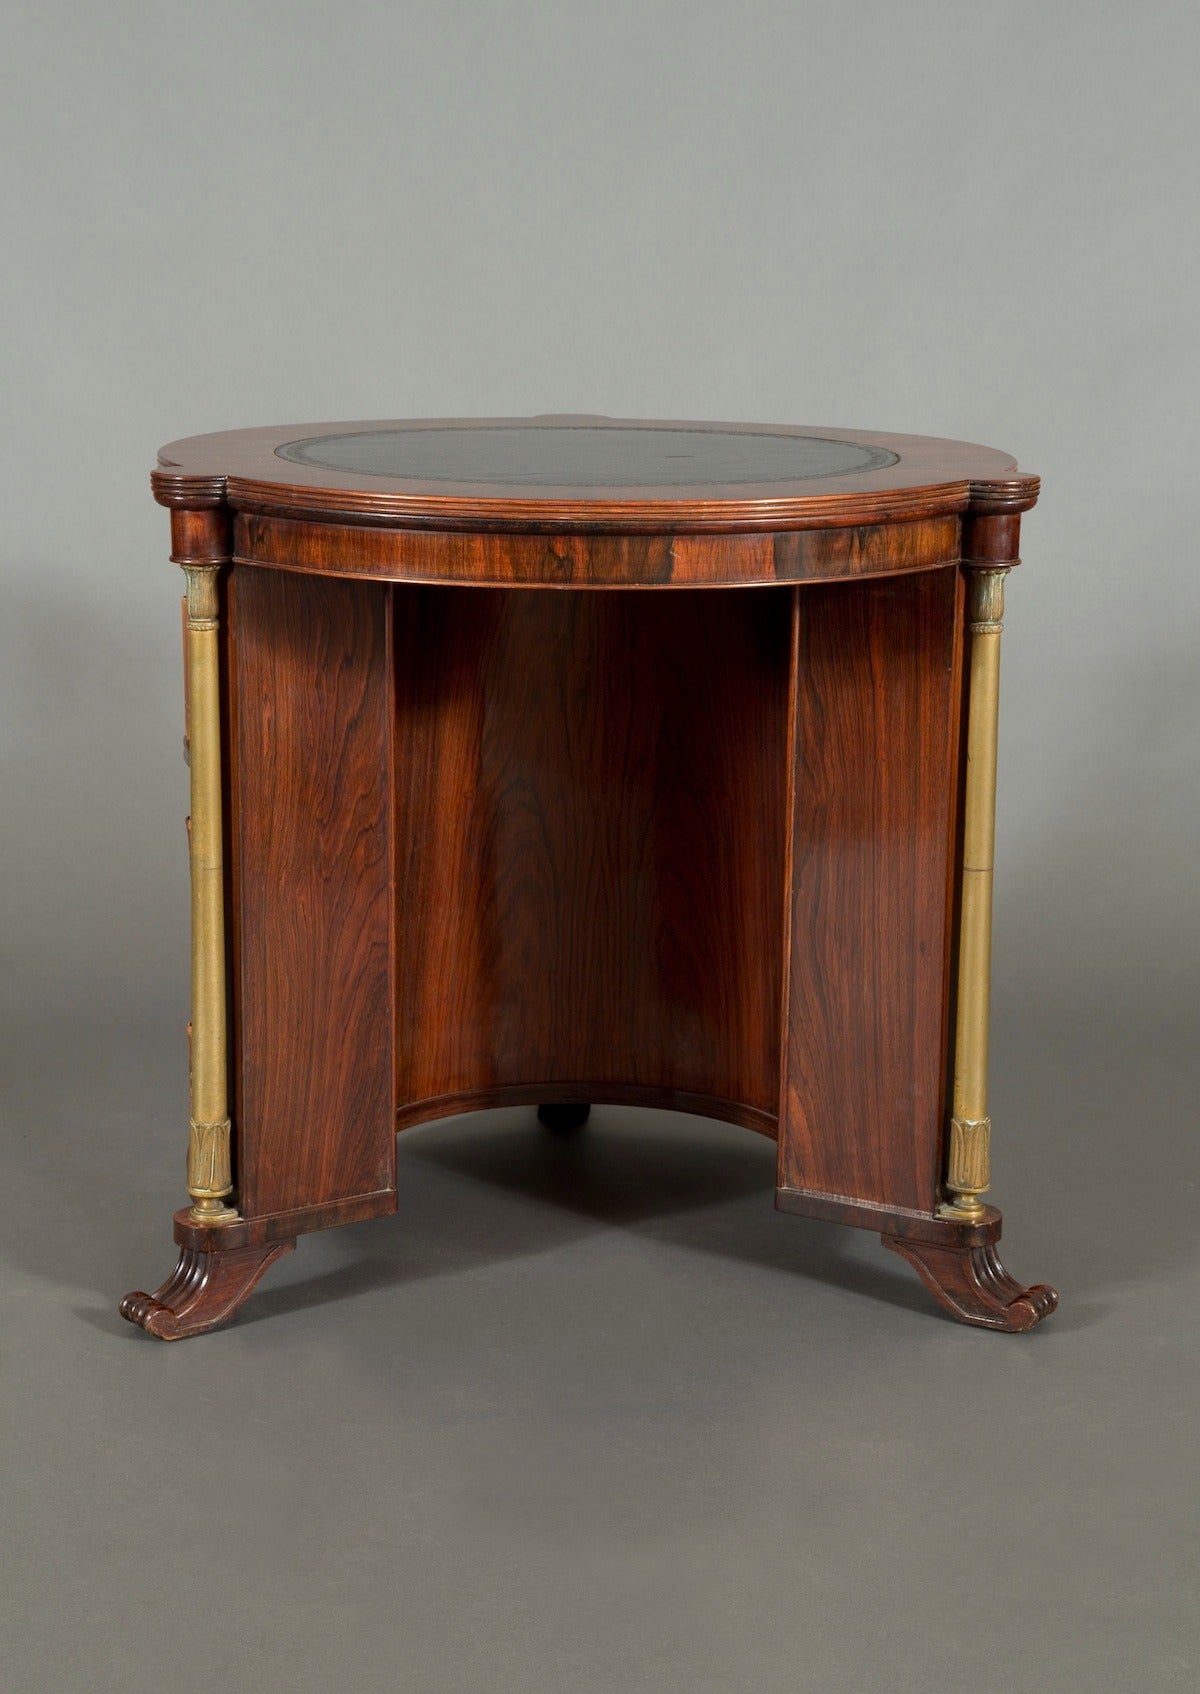 The crossbanded circular top centered by original blind tooled black leather. The kneehole base with a system of open bookshelf compartments divided by four gilt-brass columns with lotus leaf capitals. The whole raised upon four scrolled and molded